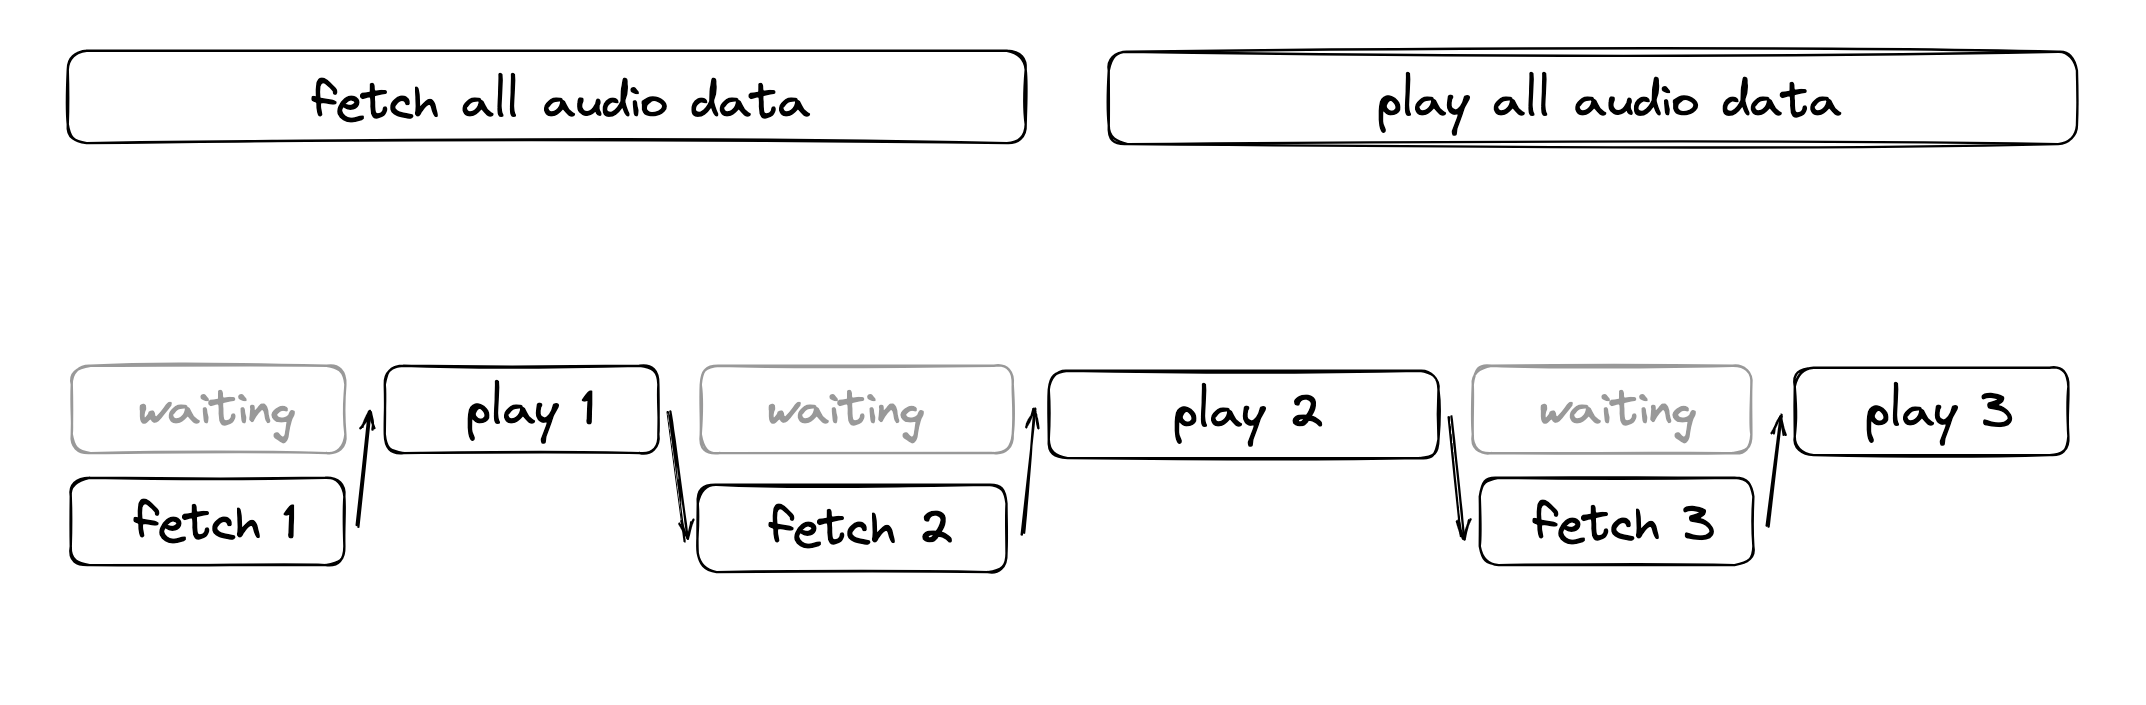 Schema showing the conversation chunked into sentences in a serialized manner